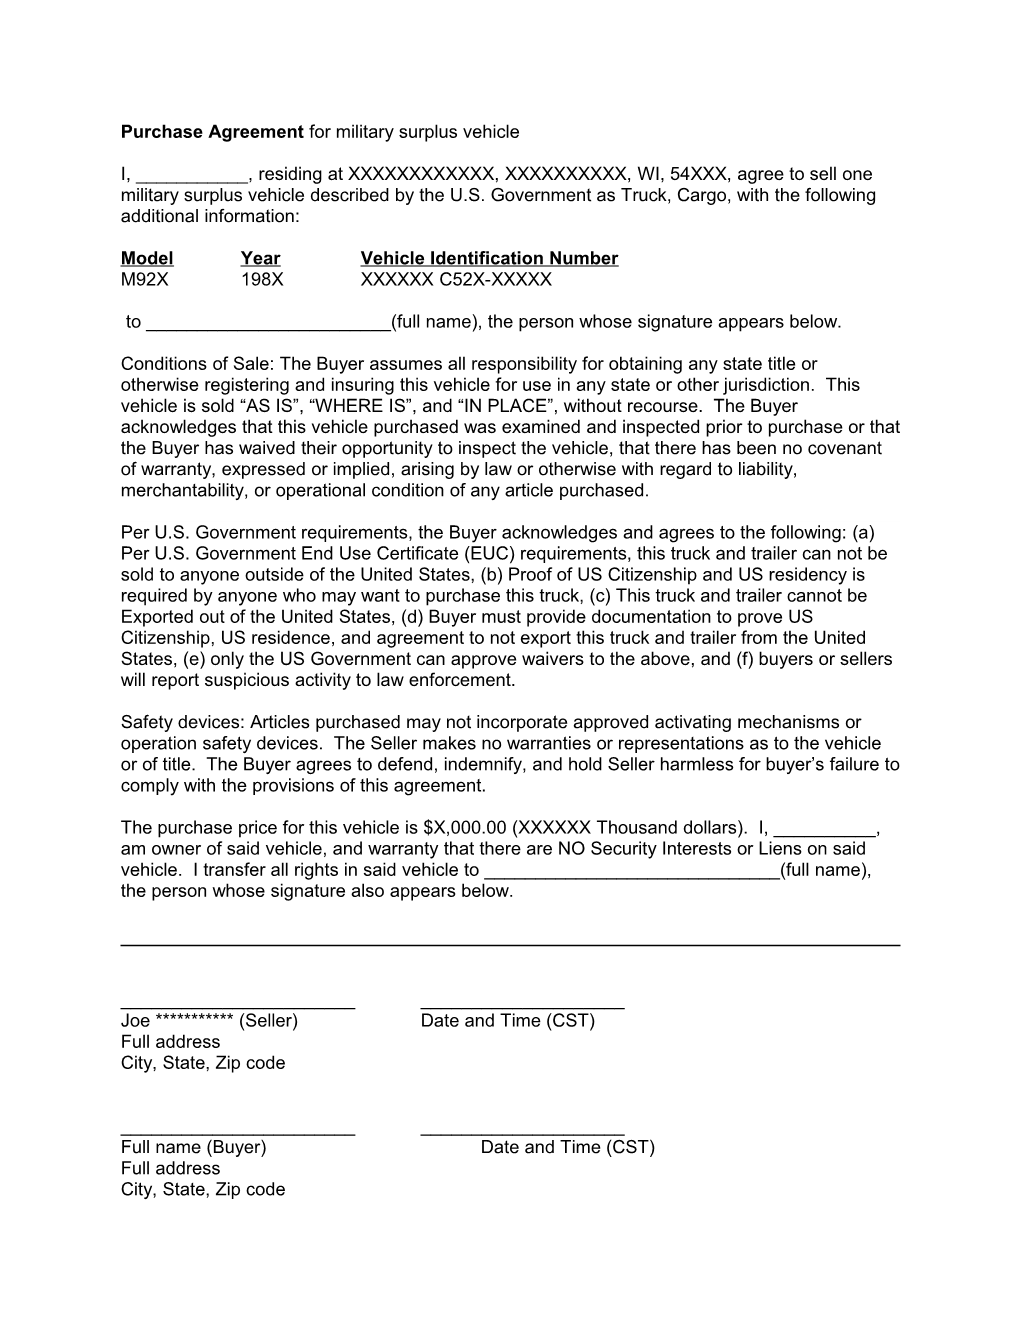 Purchase Agreement for Military Surplus Vehicle